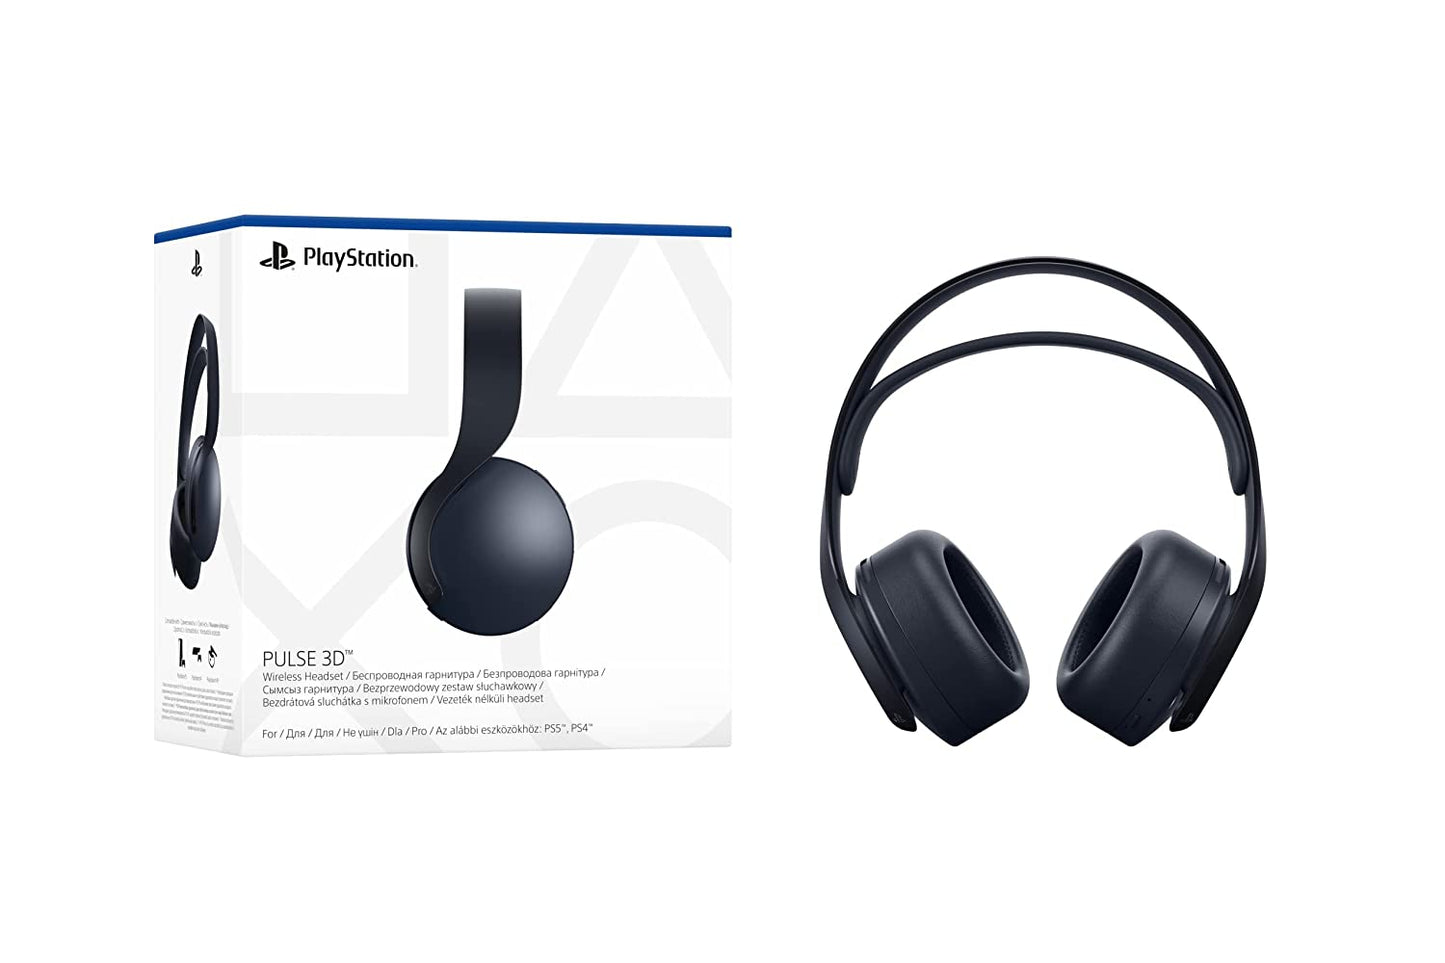 Sony PlayStation Pulse 3d Gaming Wireless Over Ear Headset/Headphone Black with Mic, Dual noise-cancellation Mic, USB Type-C charging, 12H Battery